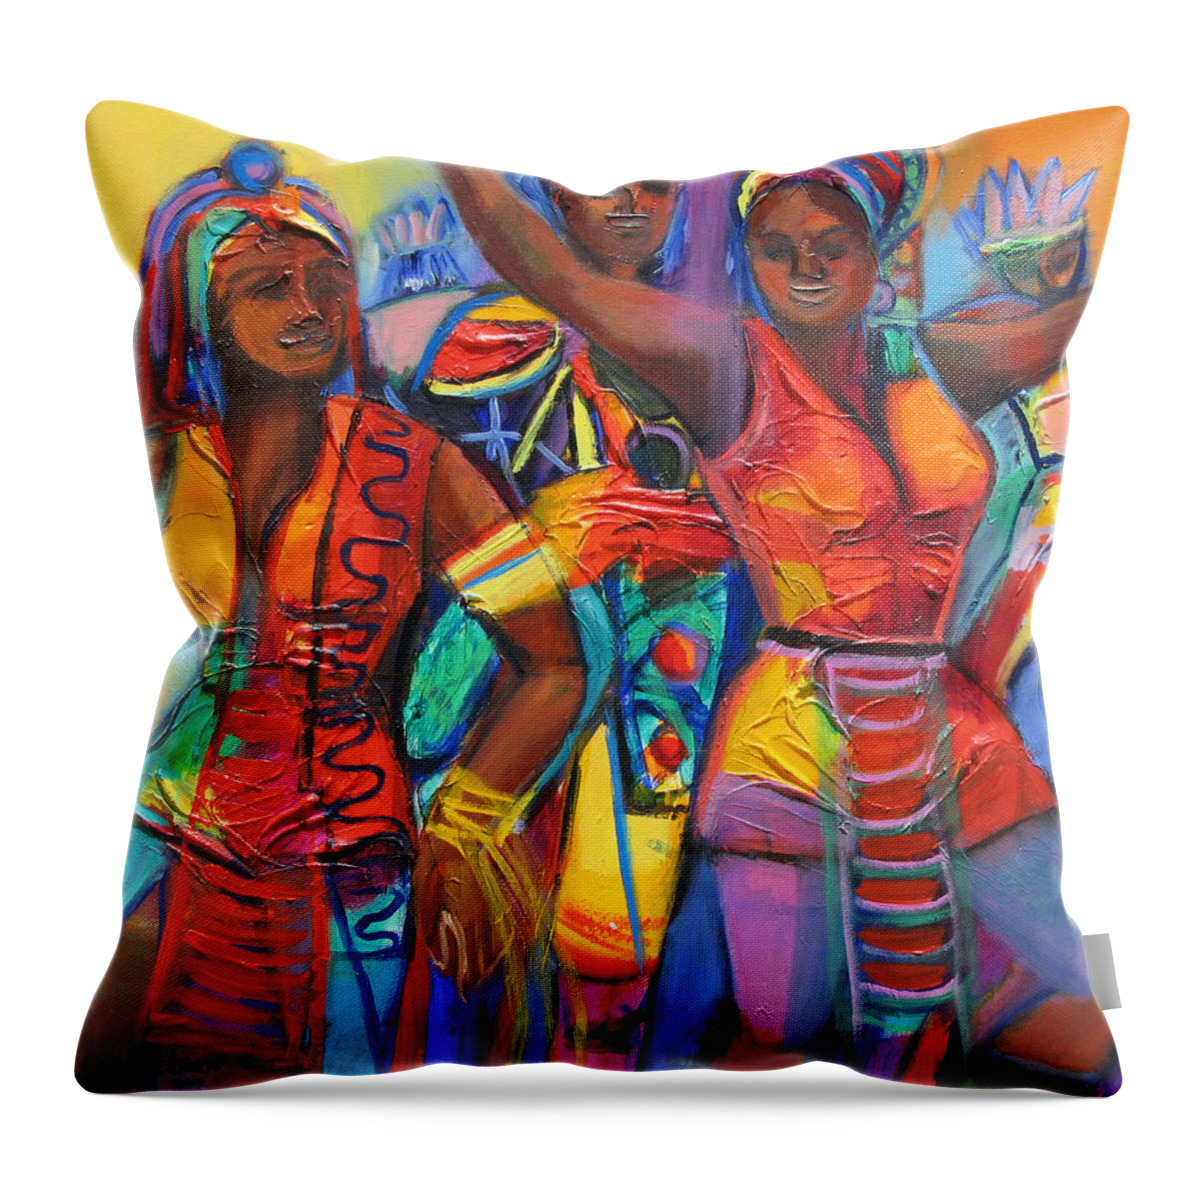 Abstract Throw Pillow featuring the painting Trinidad Carnival 2 by Cynthia McLean